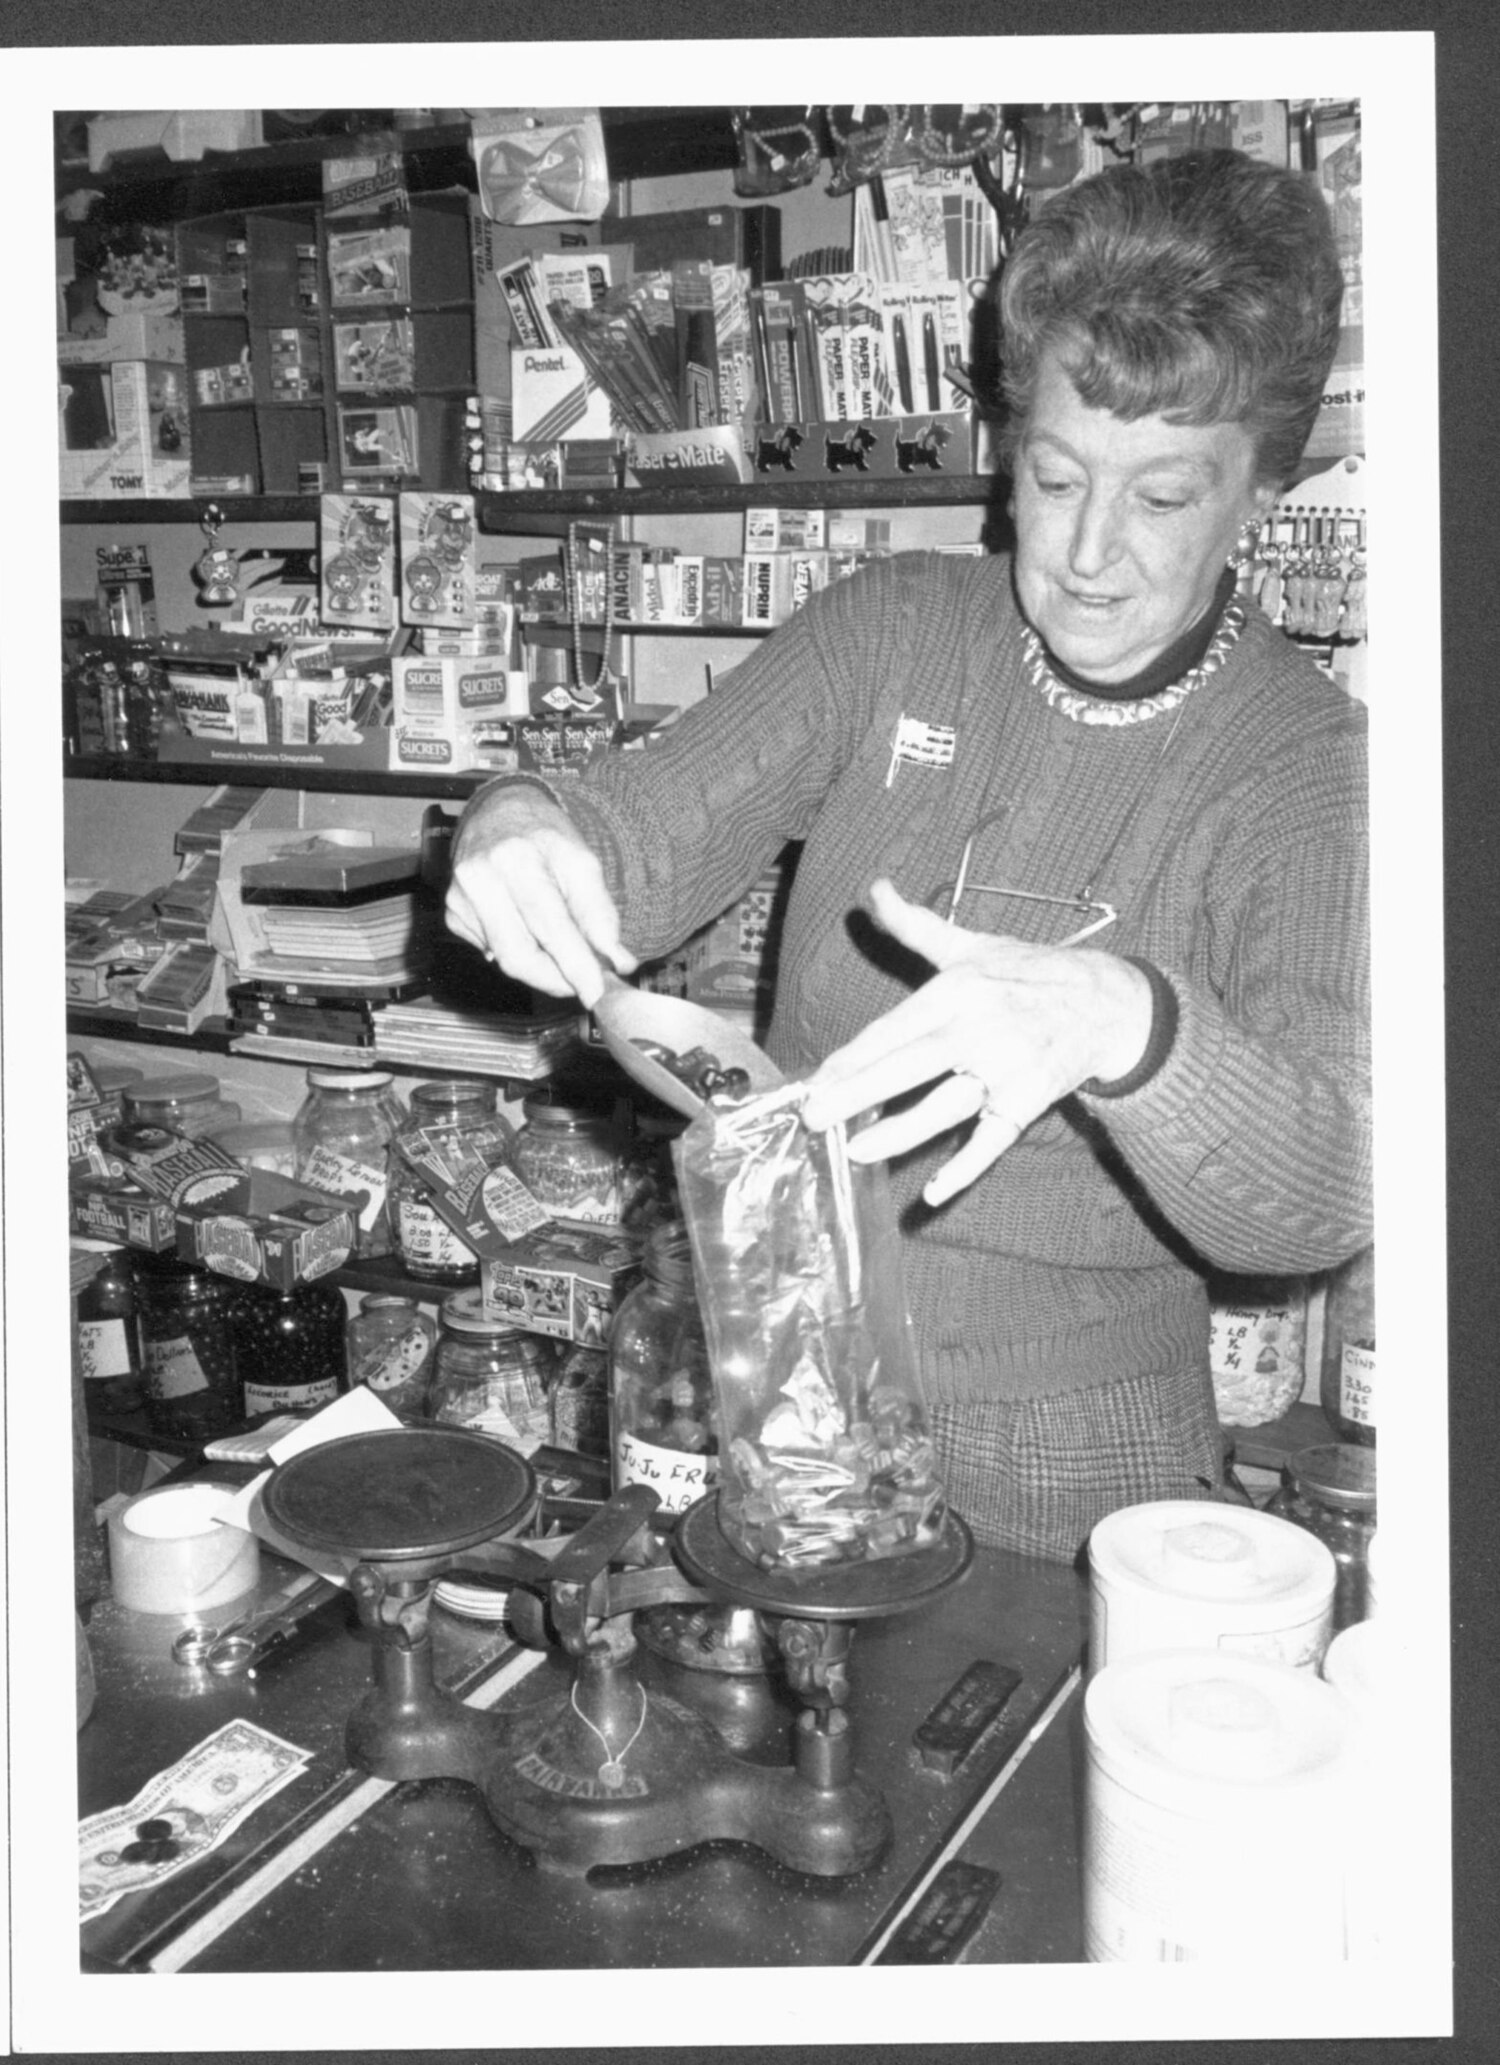 June Morris behind the counter at the Penny Candy Shop in April of 1991.